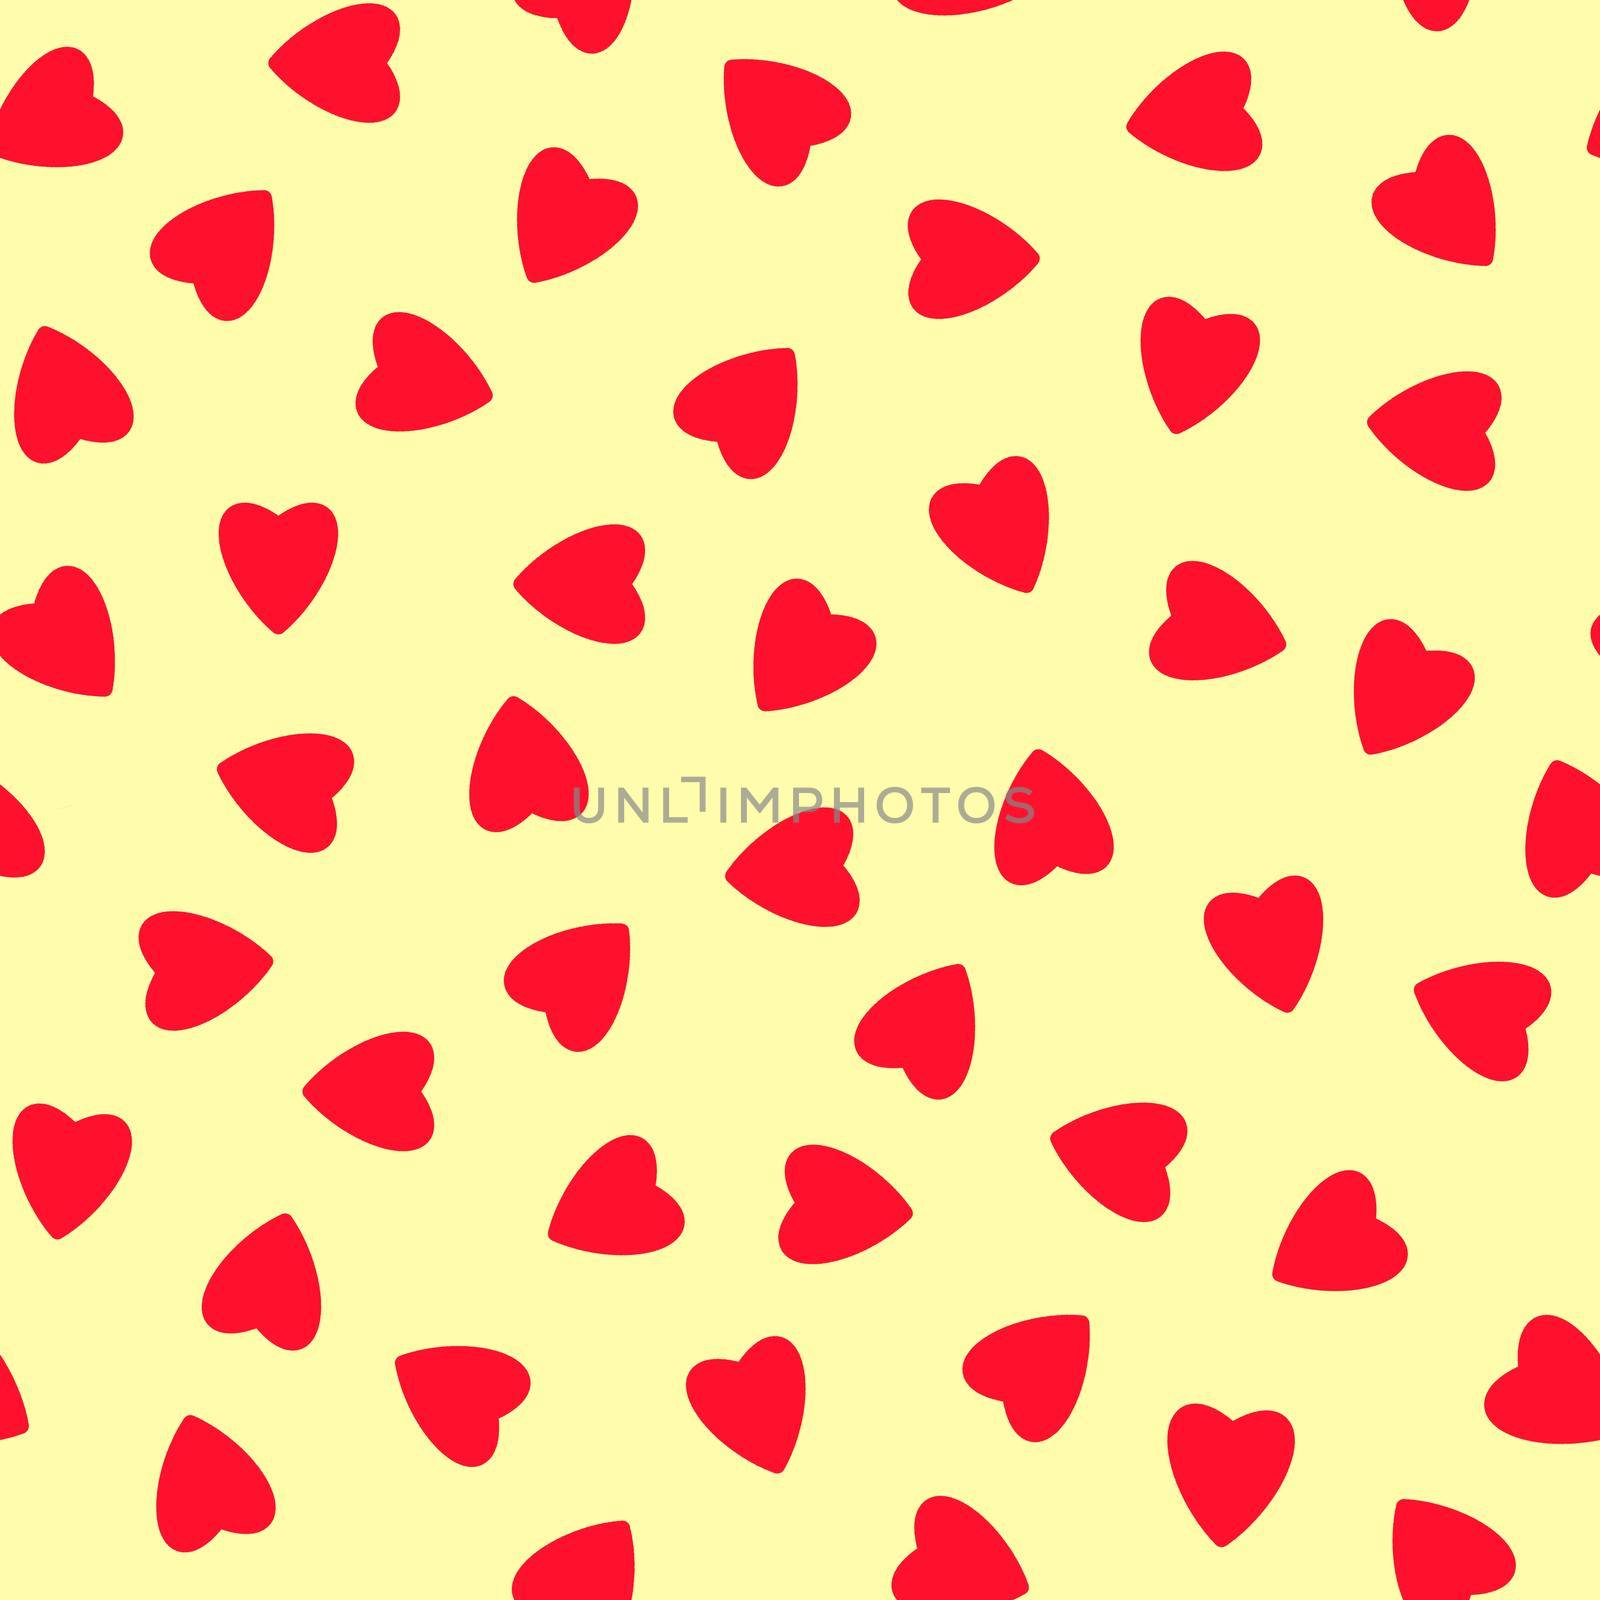 Simple hearts seamless pattern,endless chaotic texture made of tiny heart silhouettes.Valentines,mothers day background.Great for Easter,wedding,scrapbook,gift wrapping paper,textiles.Red on Ivory